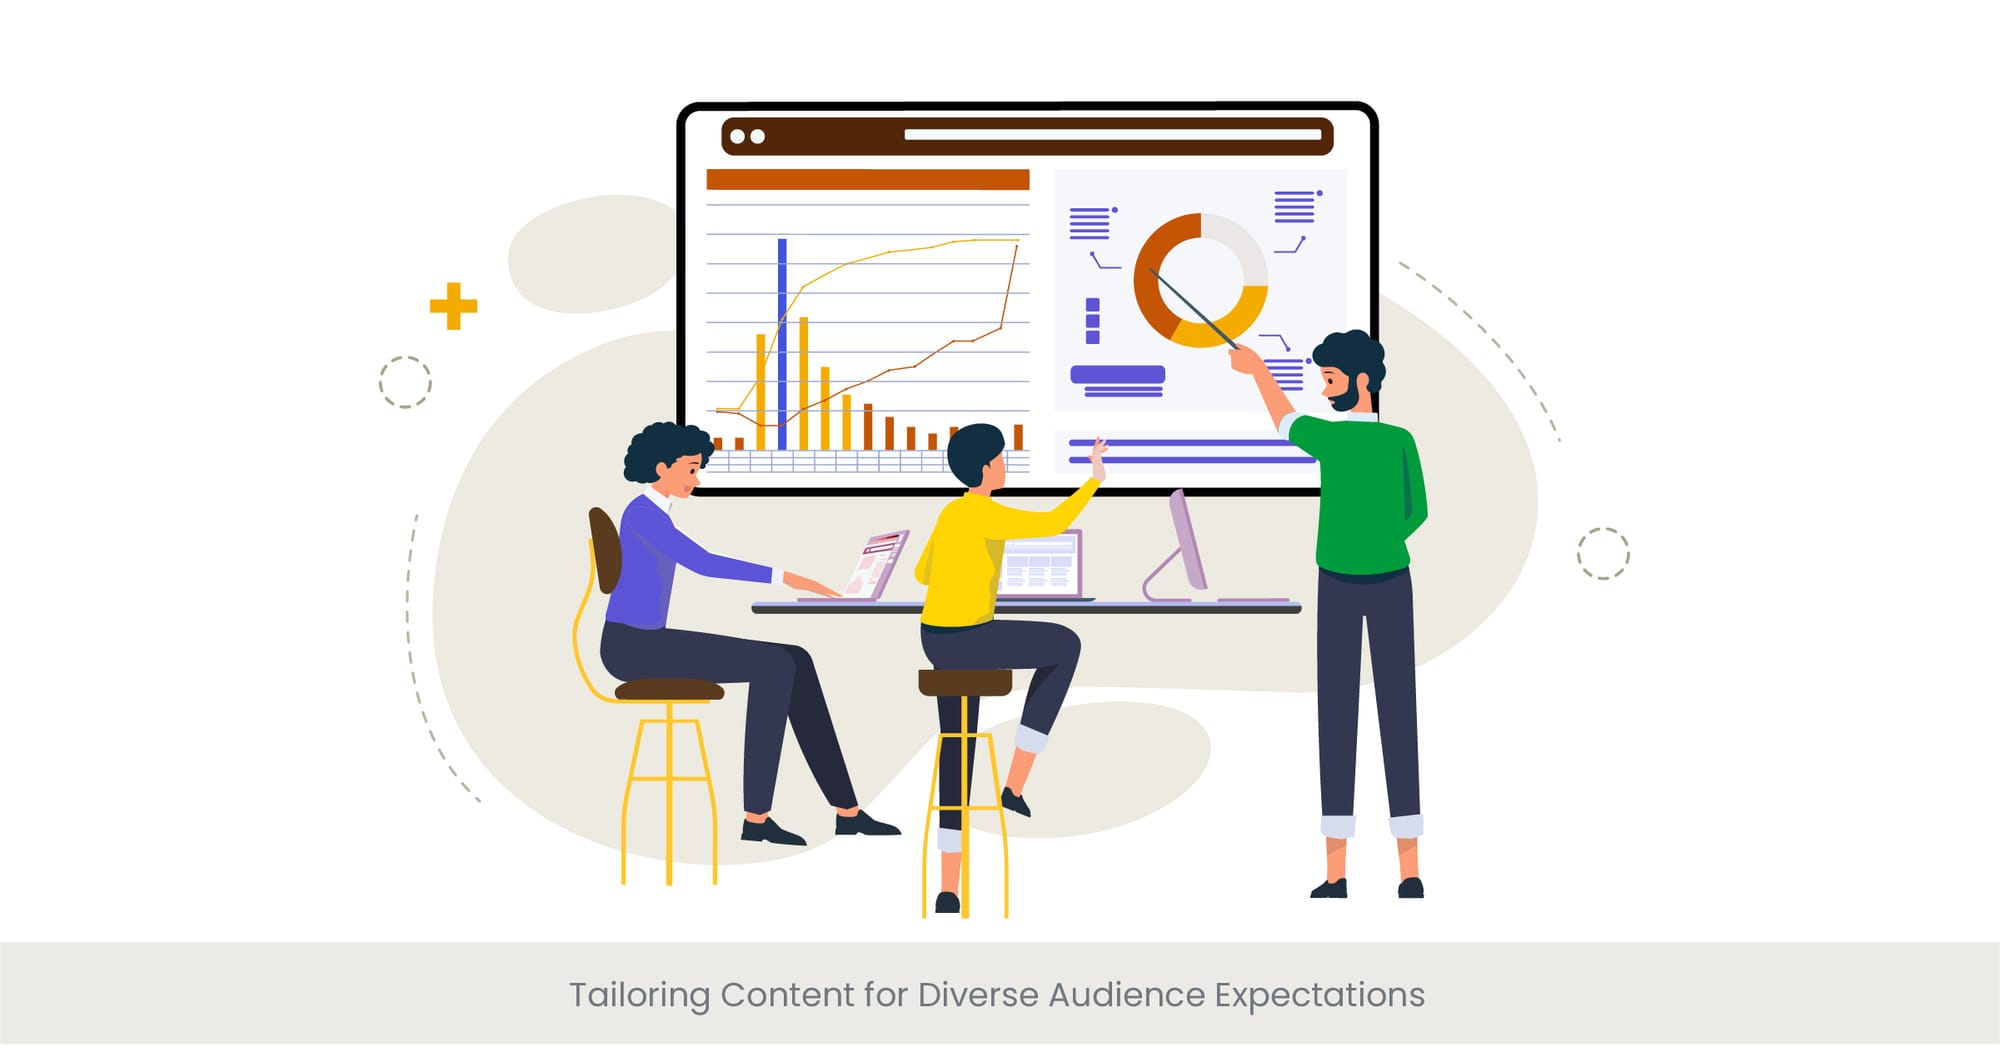 Tailoring Content for Diverse Audience Expectations